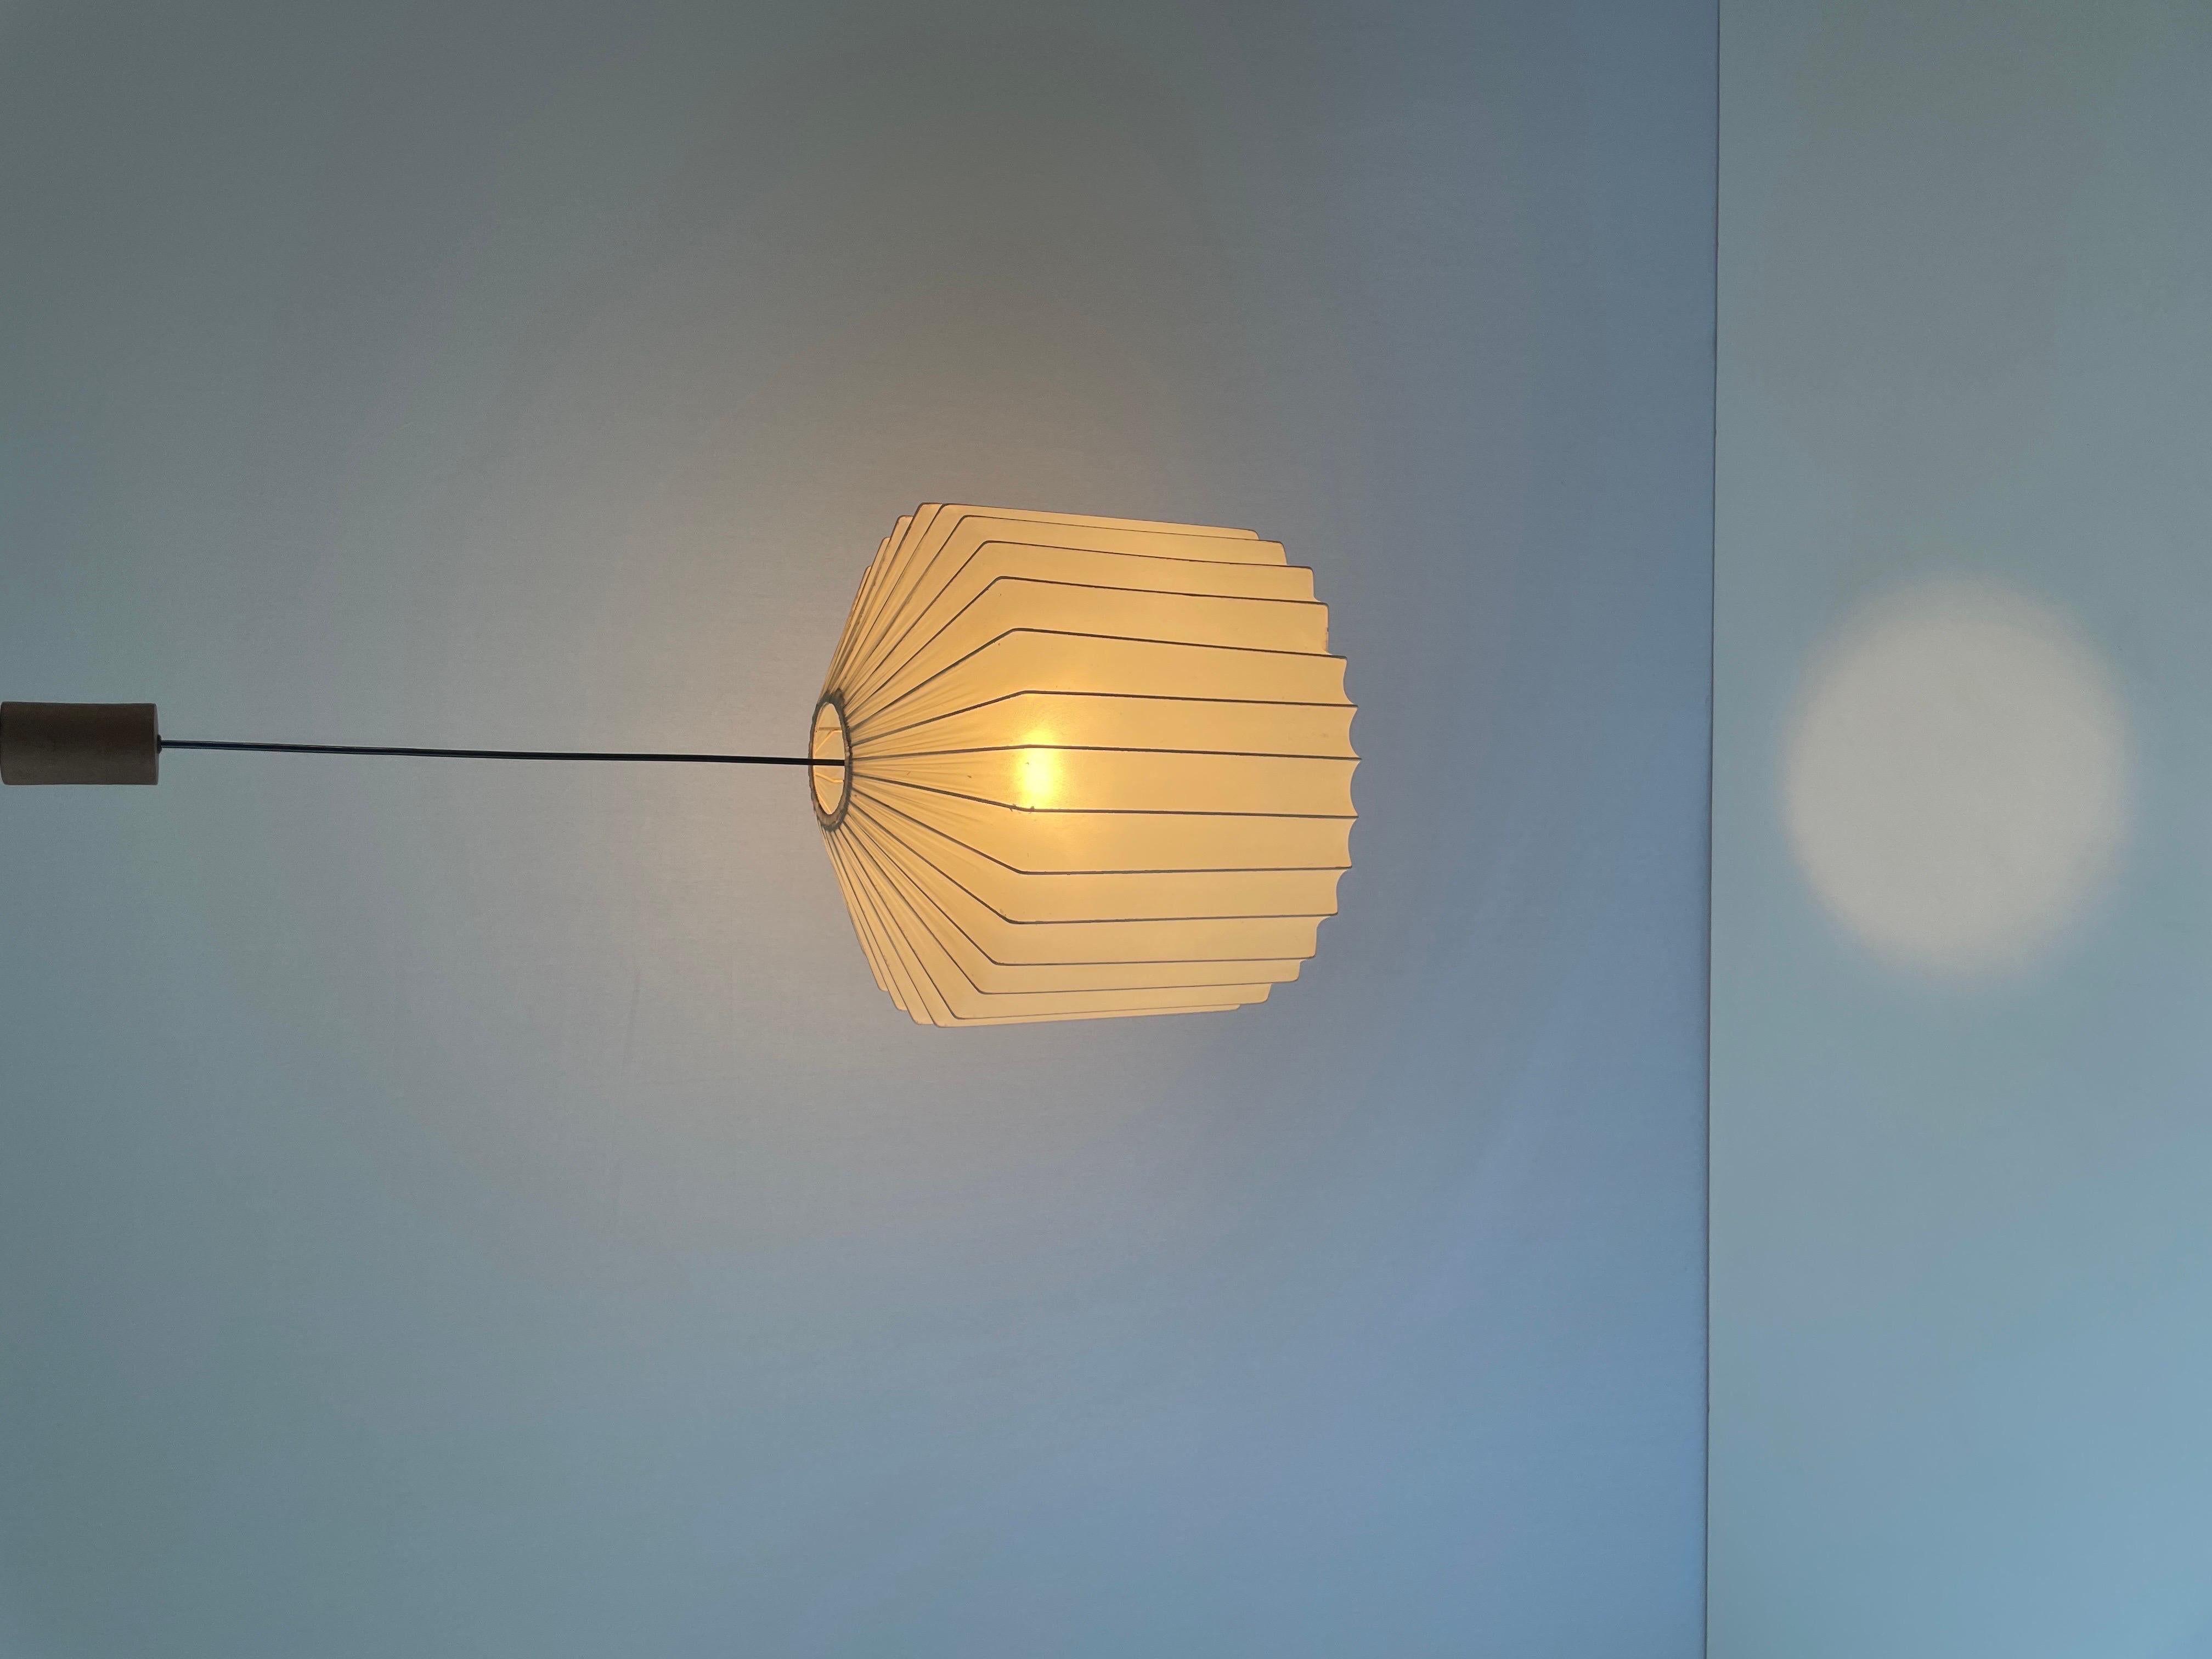 Satin Silk Fabric Ceiling Lamp in Cocoon Shape, 1960s, Italy For Sale 10